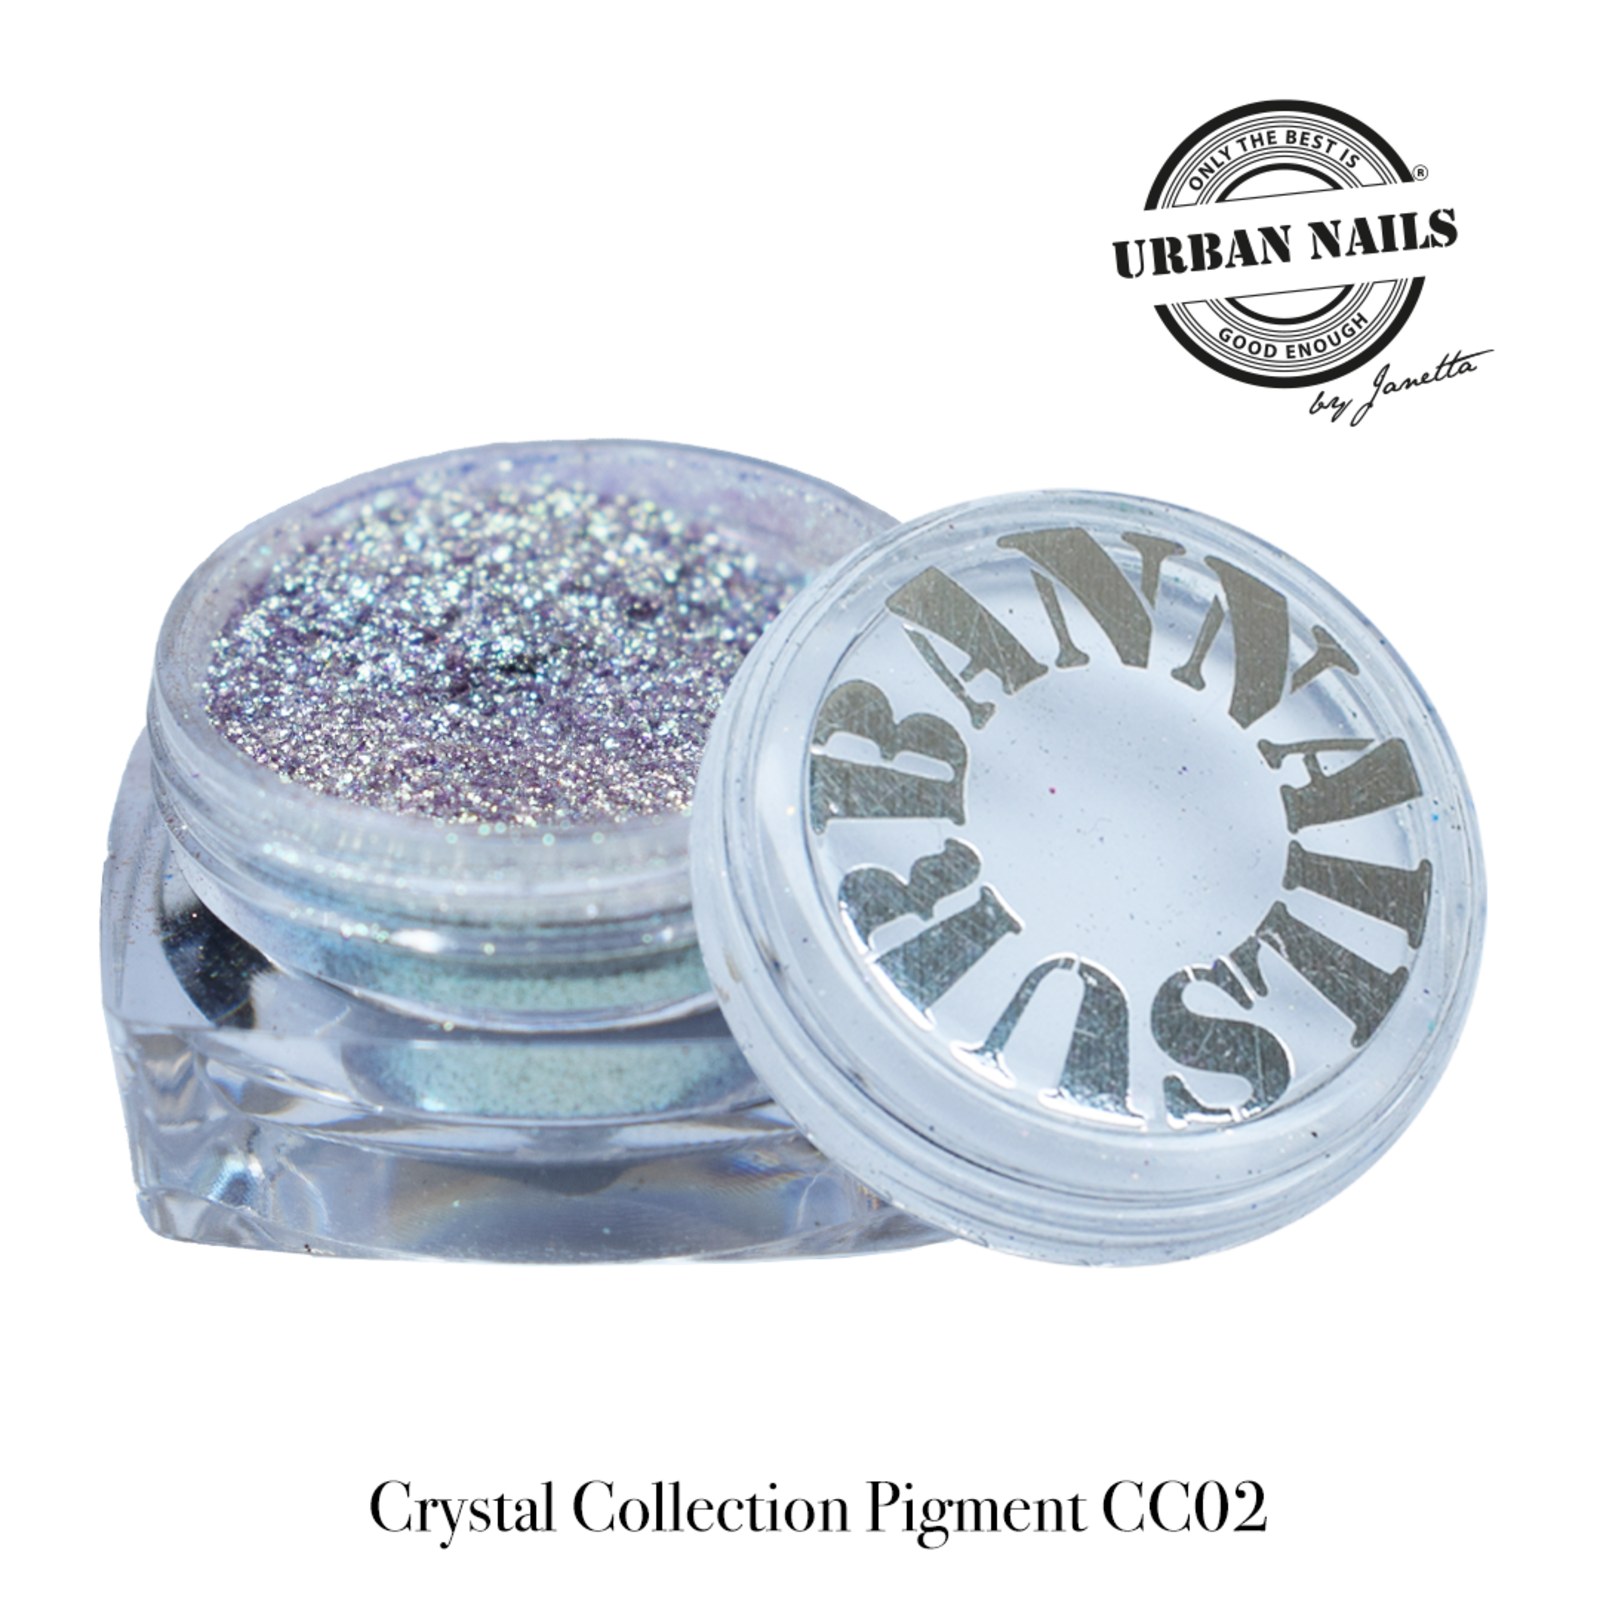 Urban nails Crystal Collection CC2